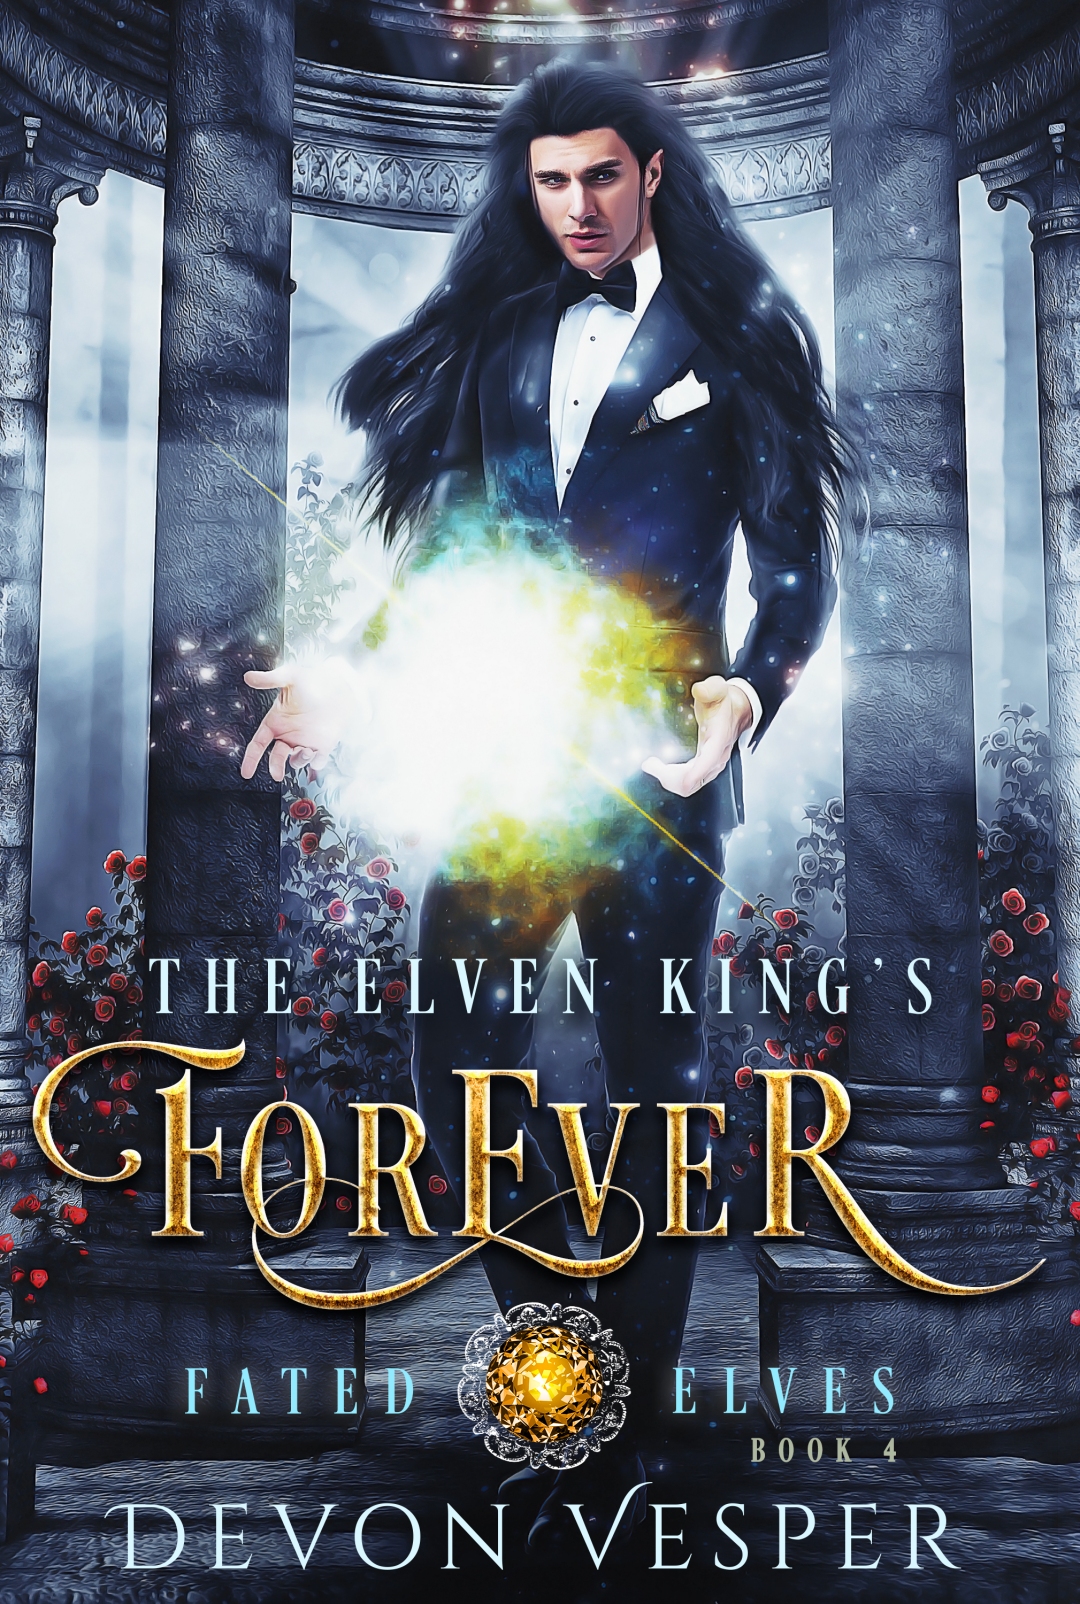 The Elven King's Forever ebook (1)